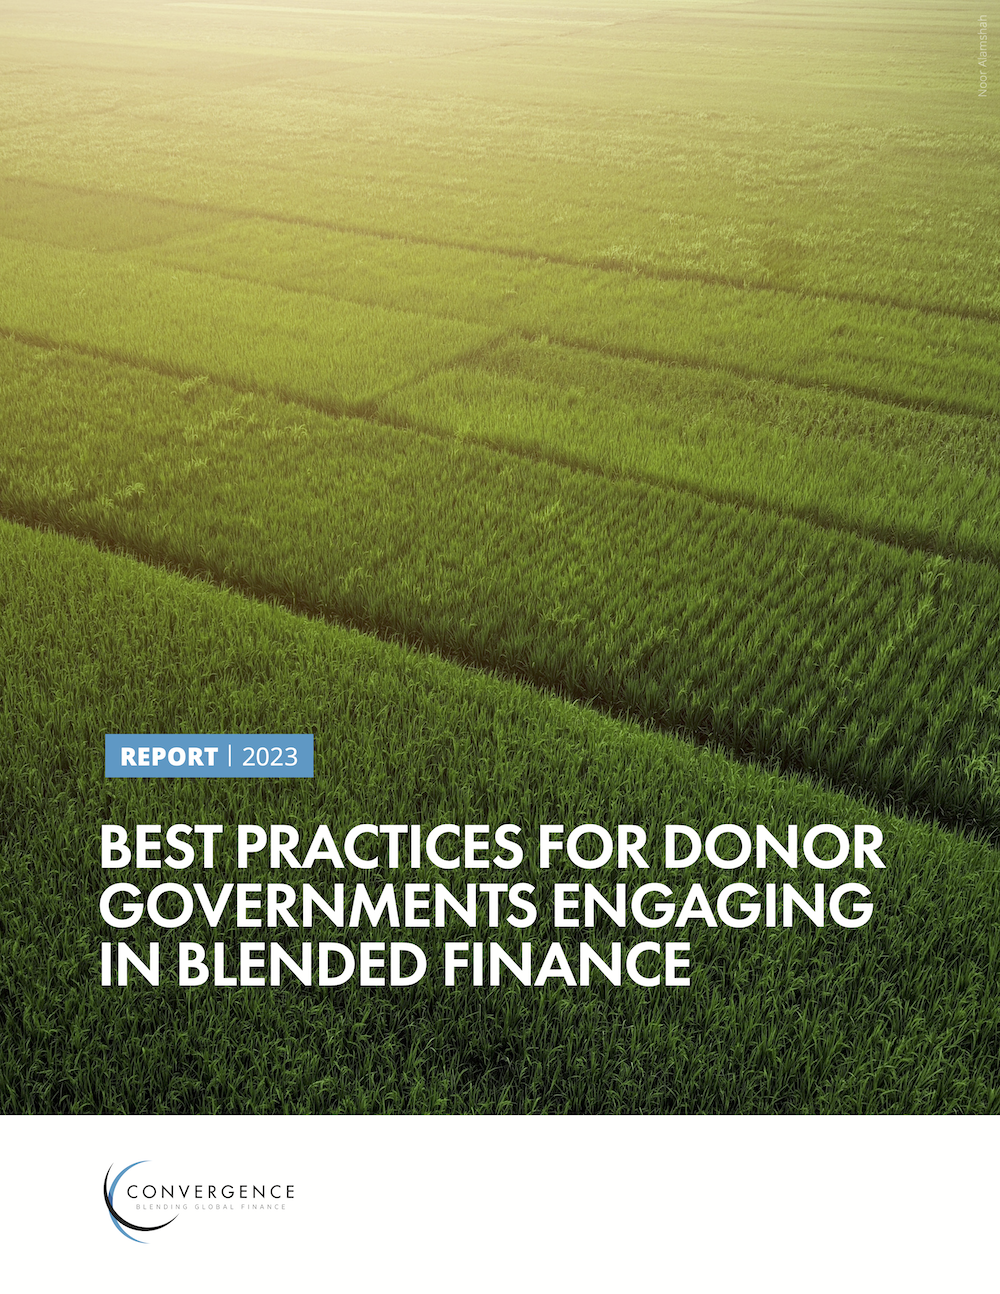 Best Practices for Donor Governments Engaging in Blended Finance